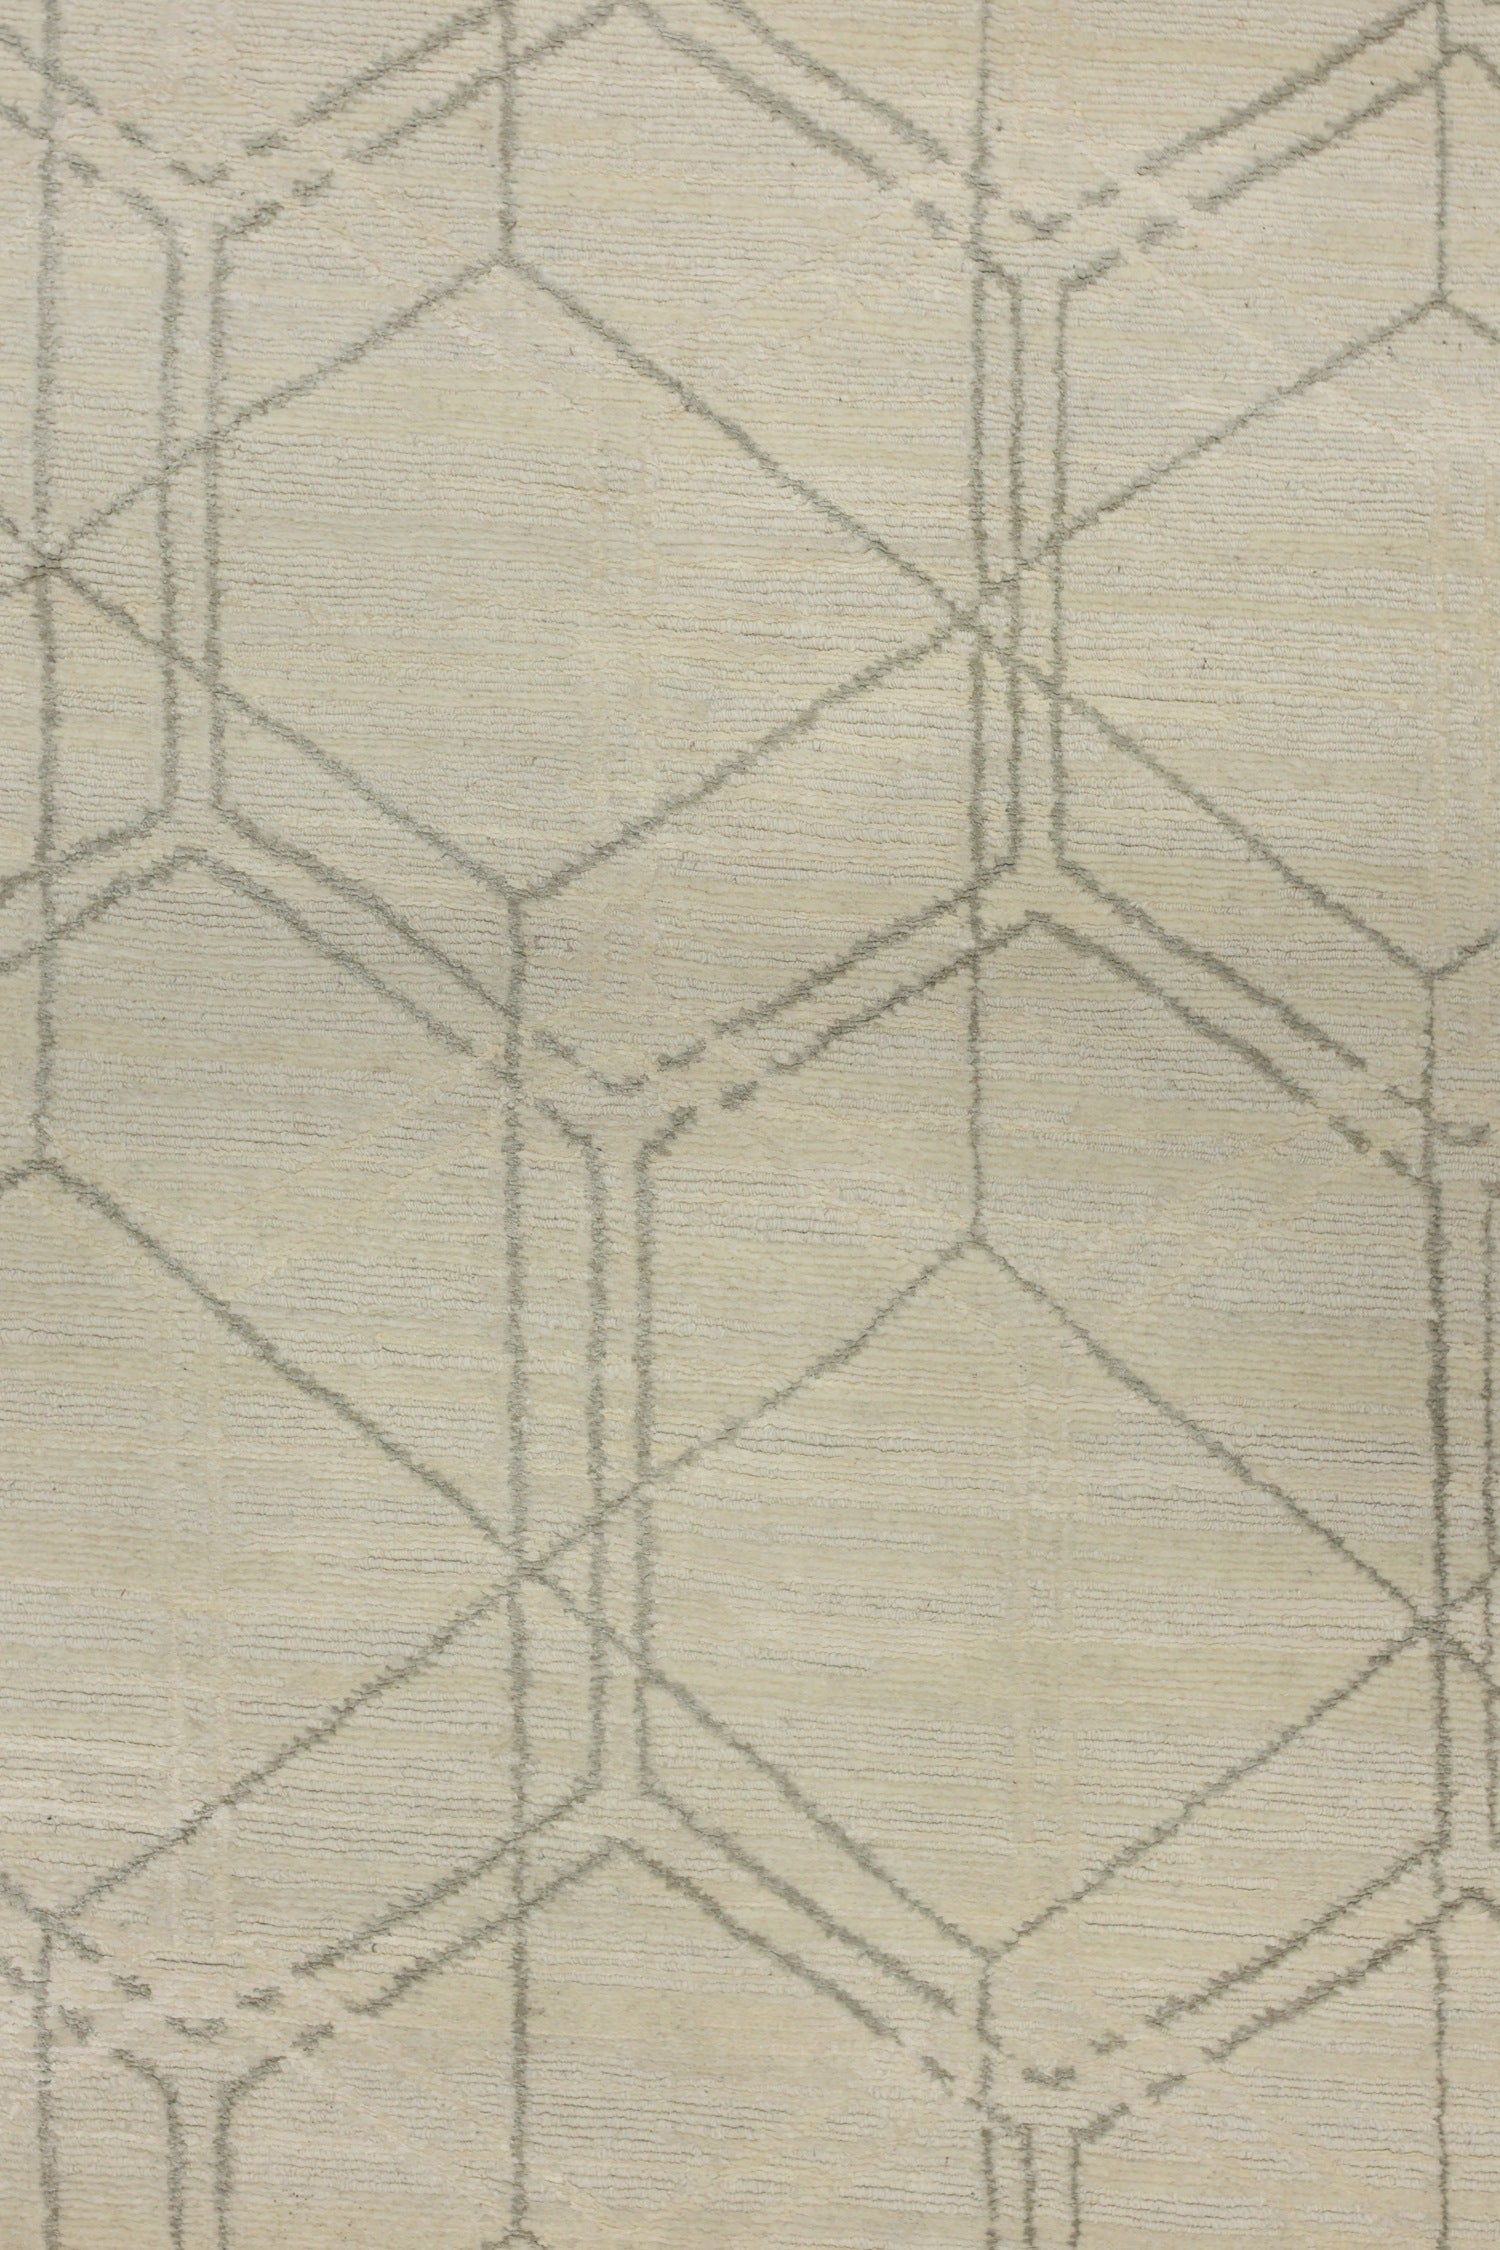 Foursquare Handwoven Transitional Rug, J72451